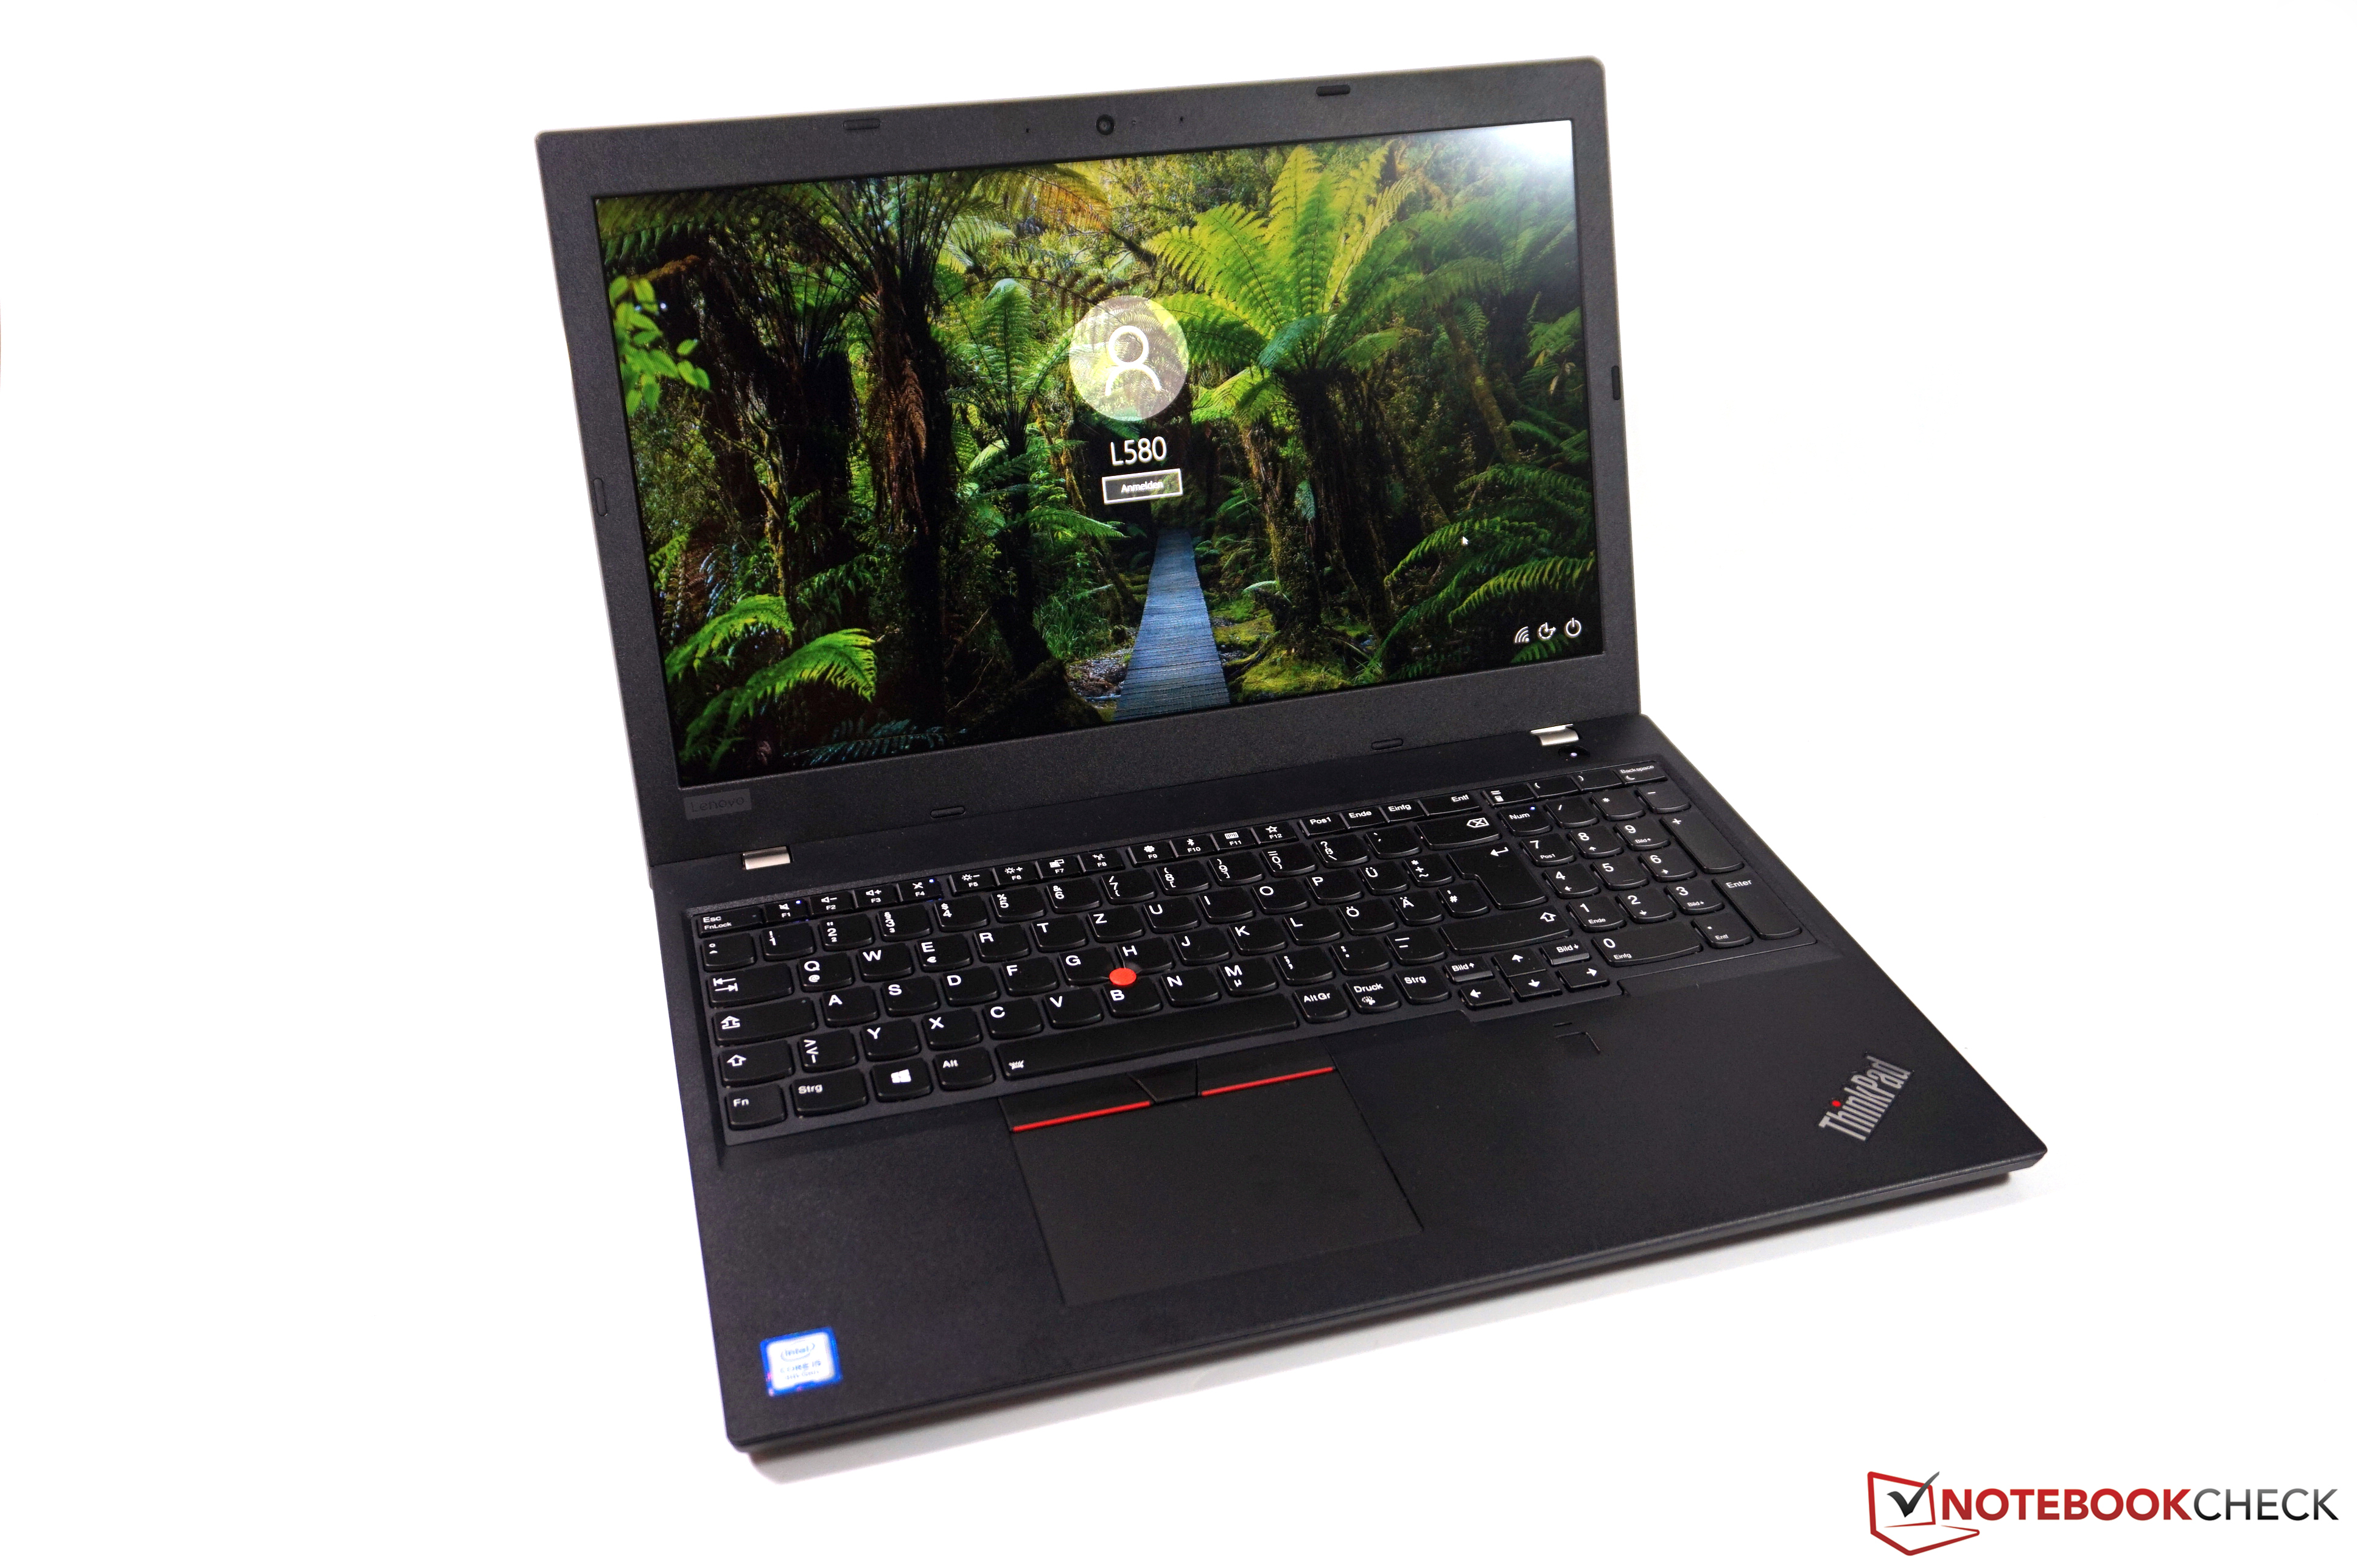 Lenovo ThinkPad L580 Laptop Review: Reliable office notebook